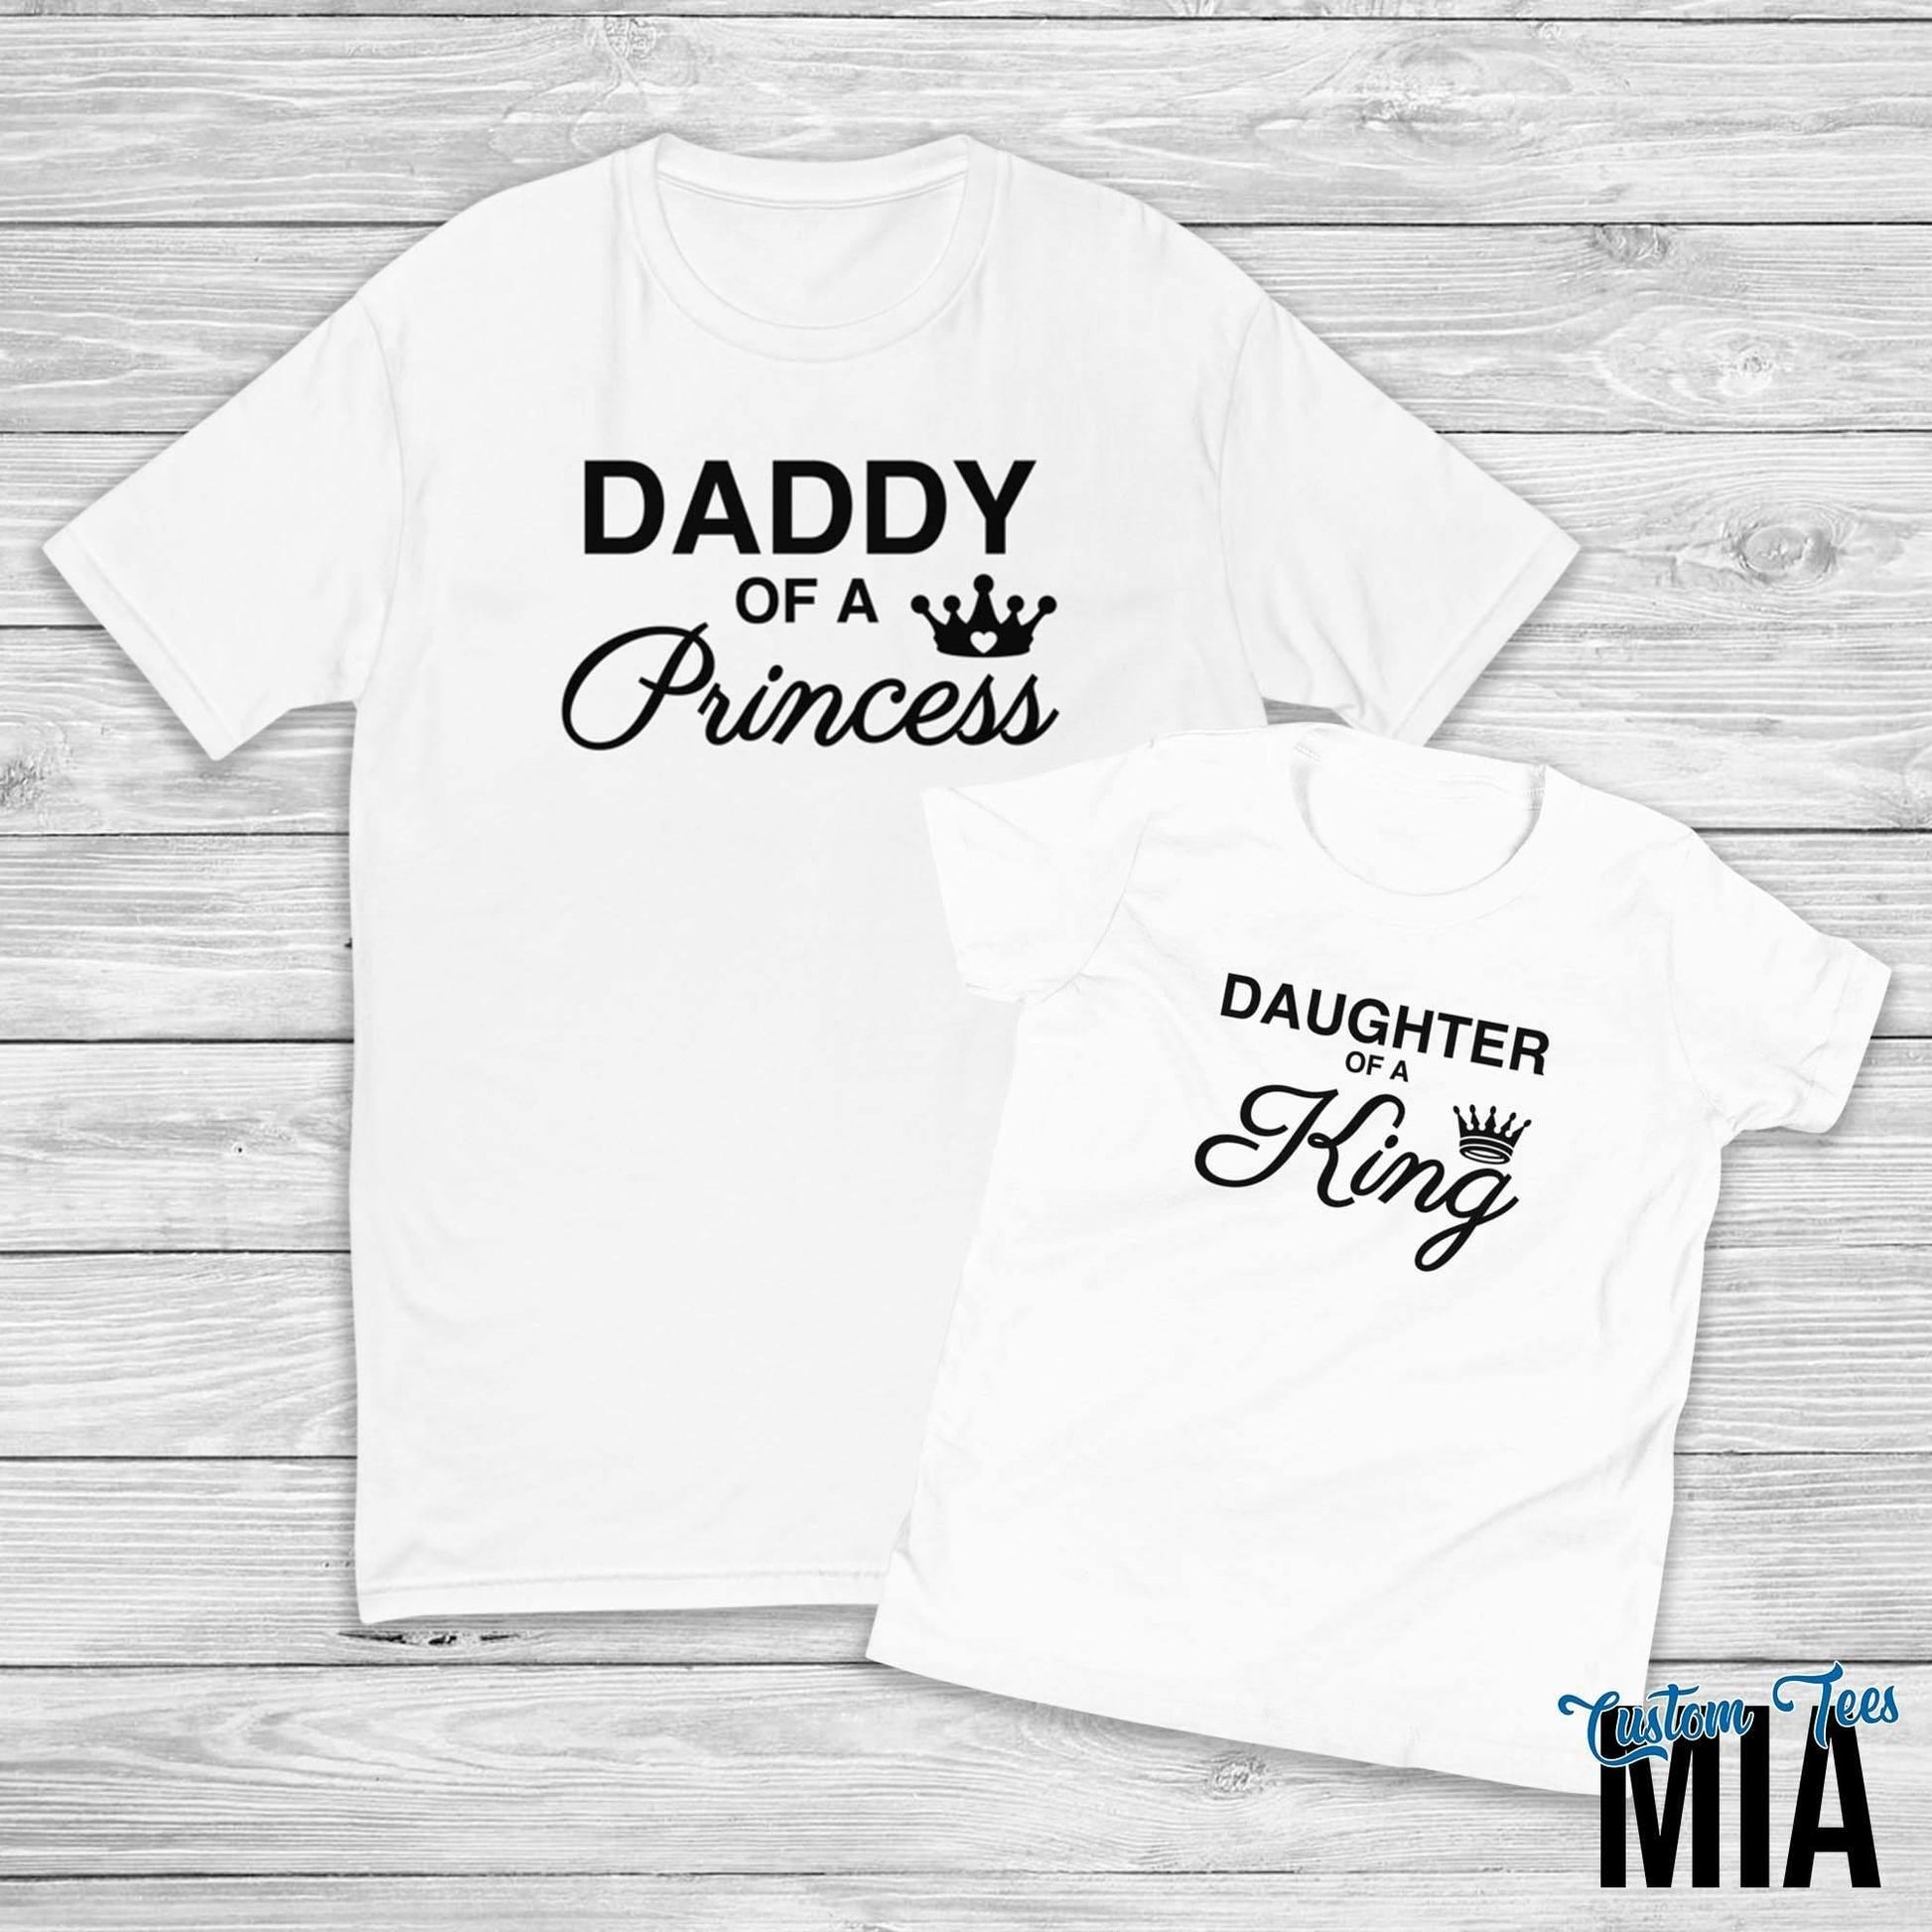 Daddy of a Princess Daughter of a King Matching Father and Daughter Shirt - Custom Tees MIA